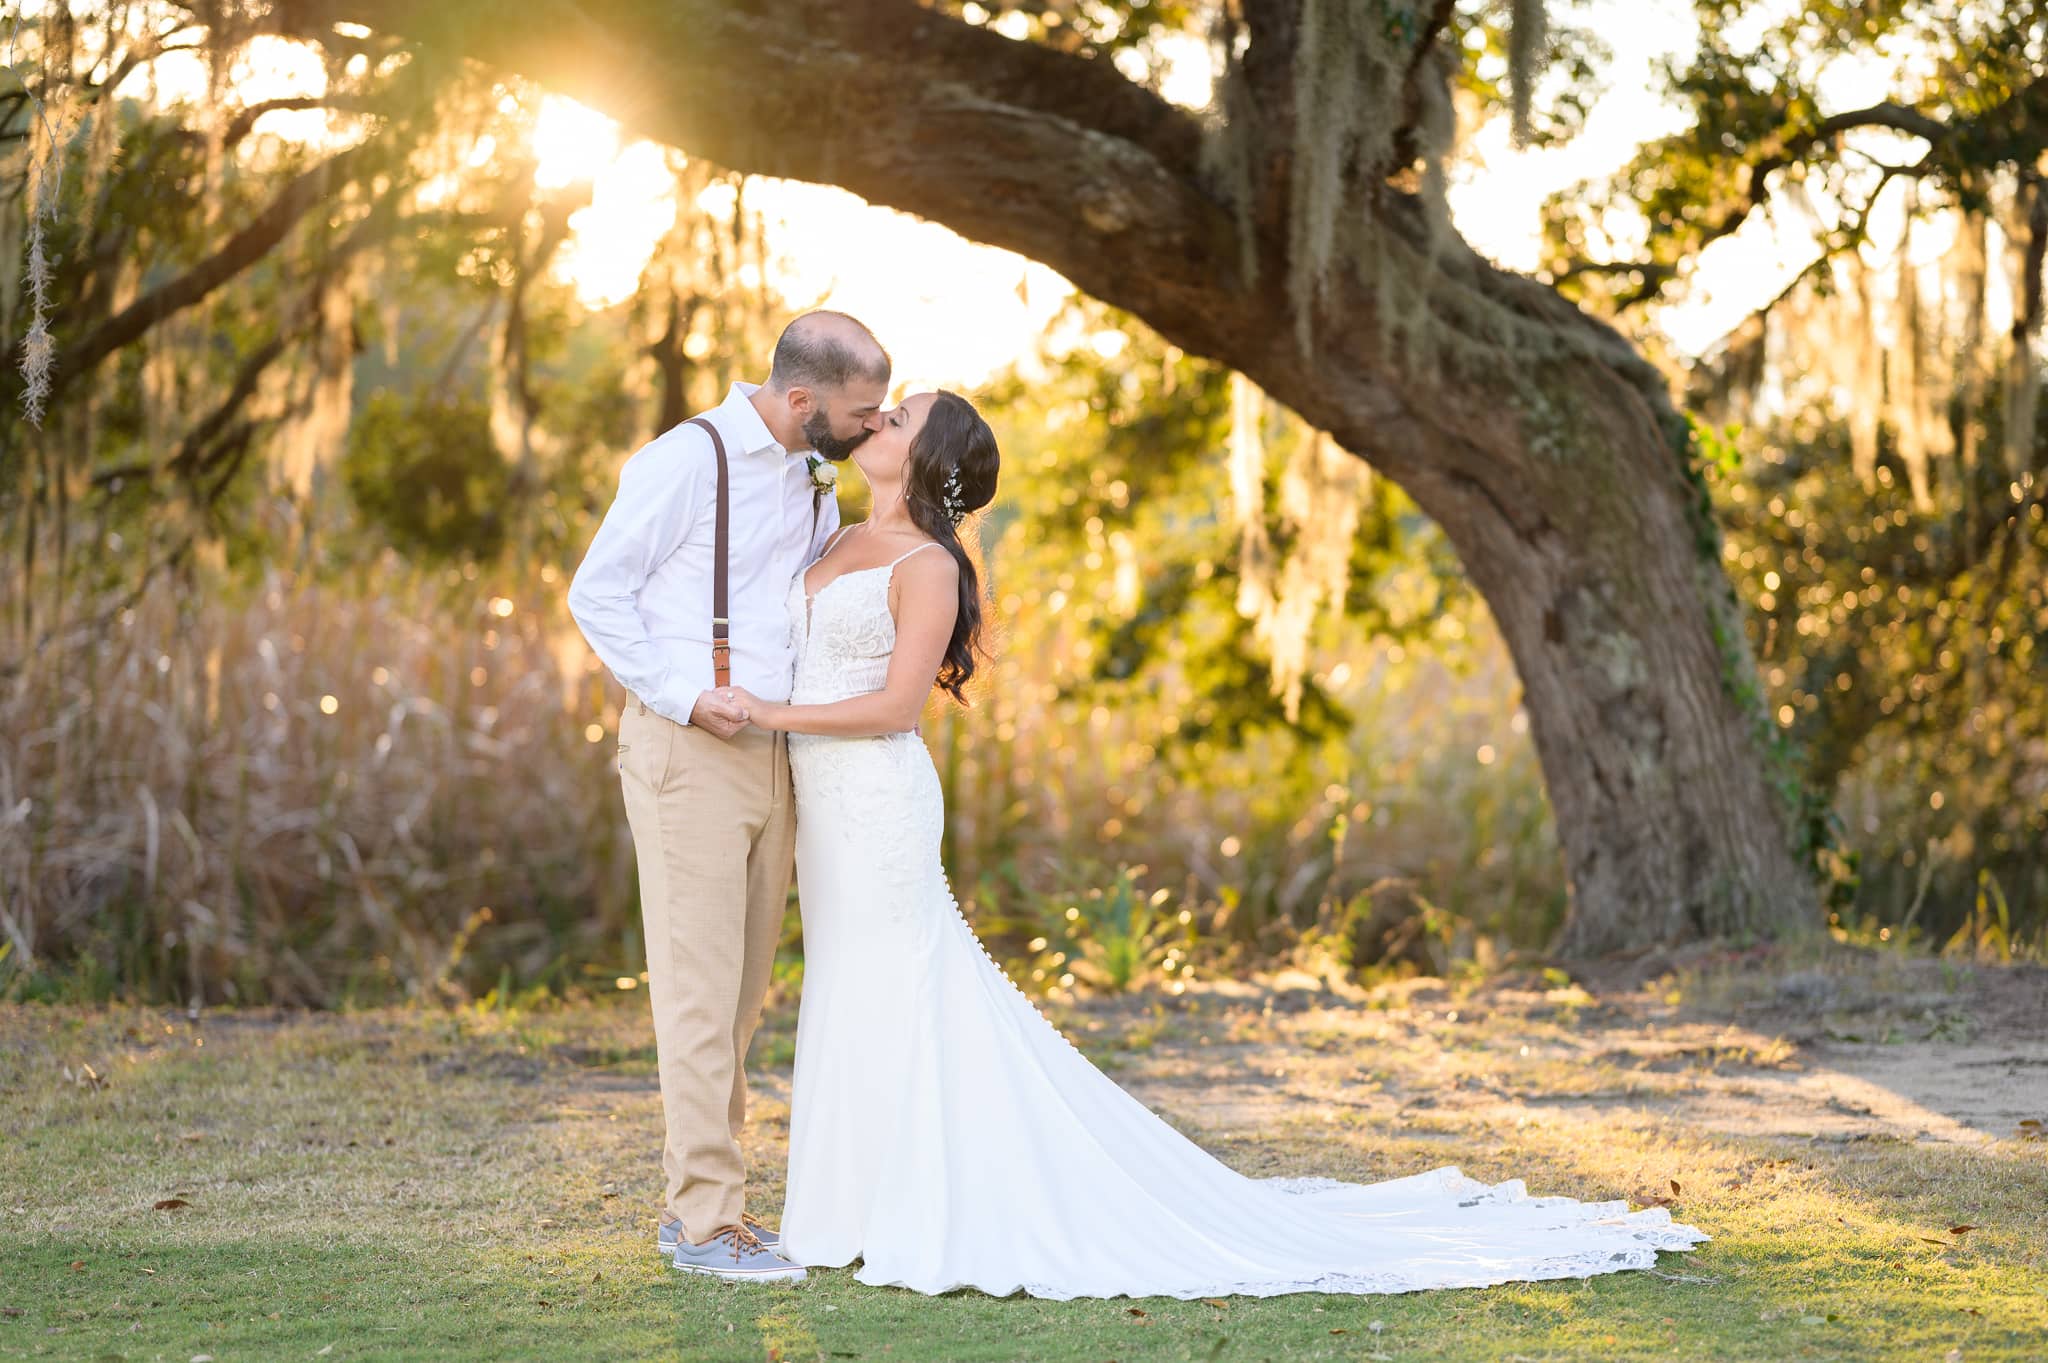 Kiss with sunlight filtering through the tree - Pawleys Plantation